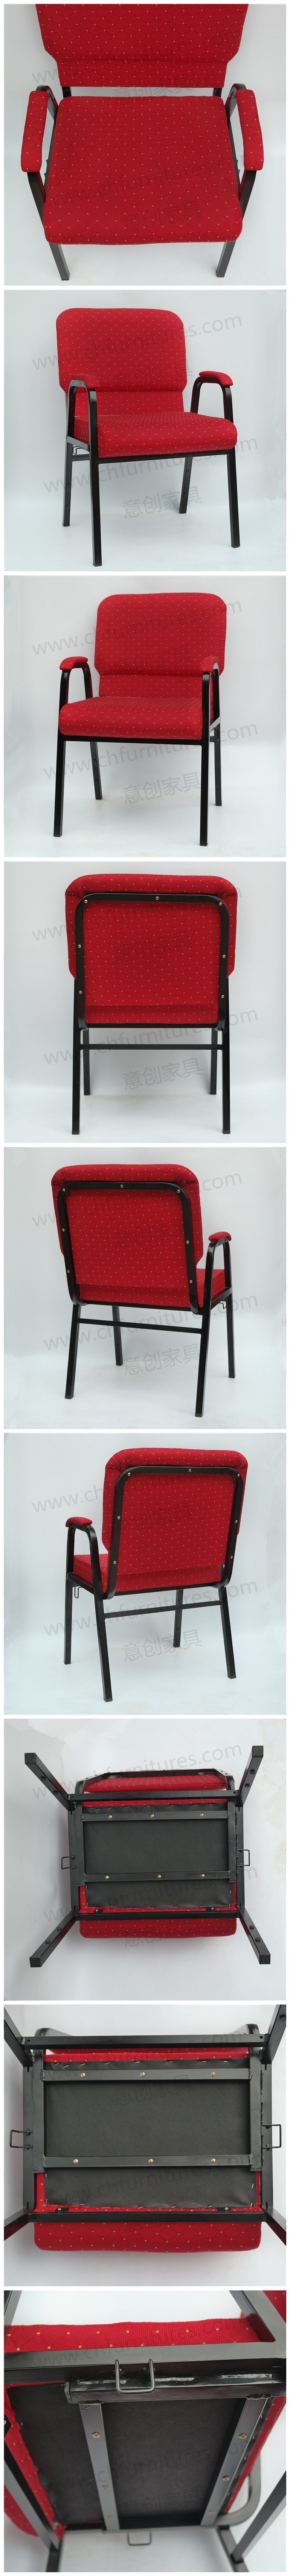 Yc-G30 Hot Sale Wholesale Dining Chair Metal Stacking Church Chair